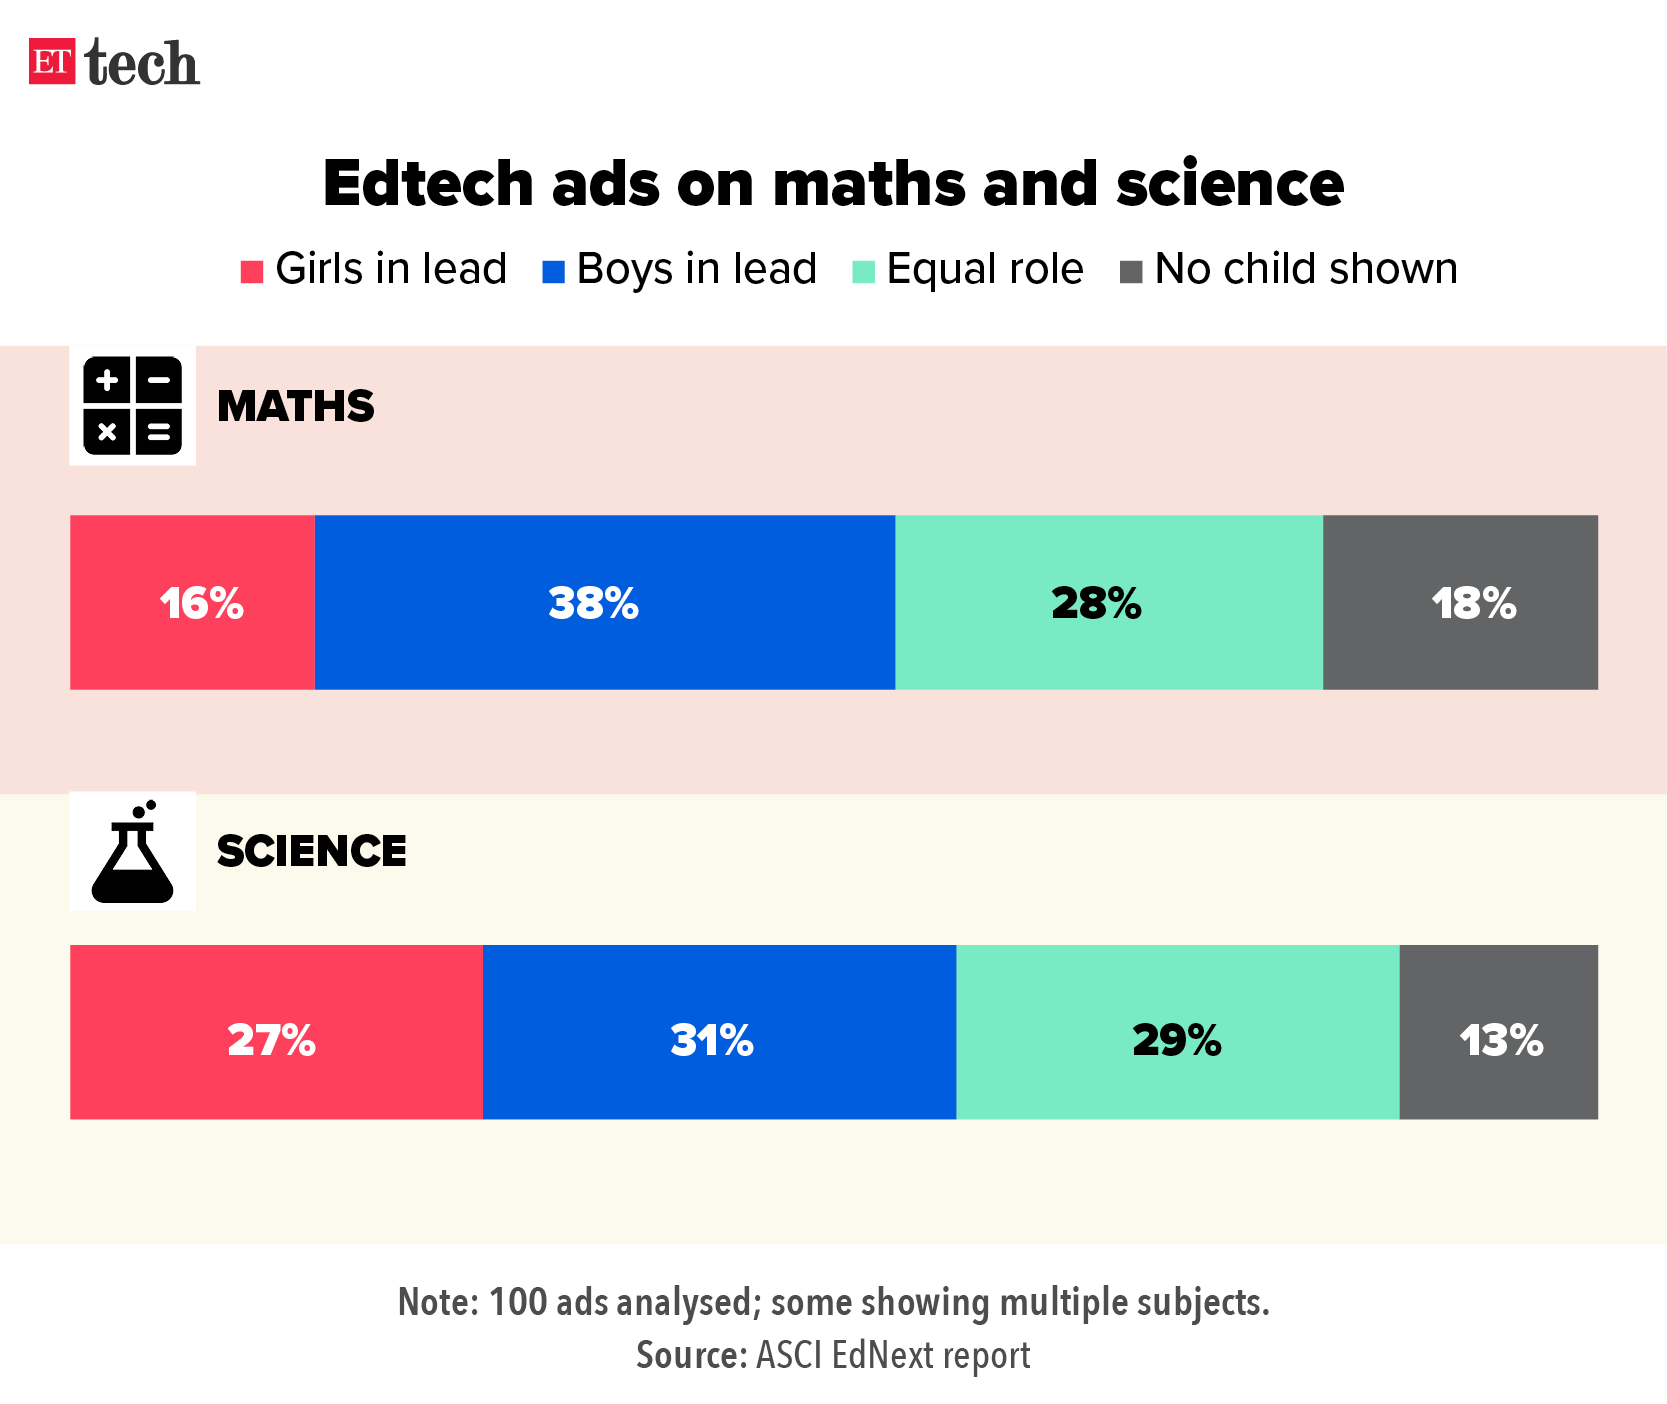 Edtech ads on maths and science